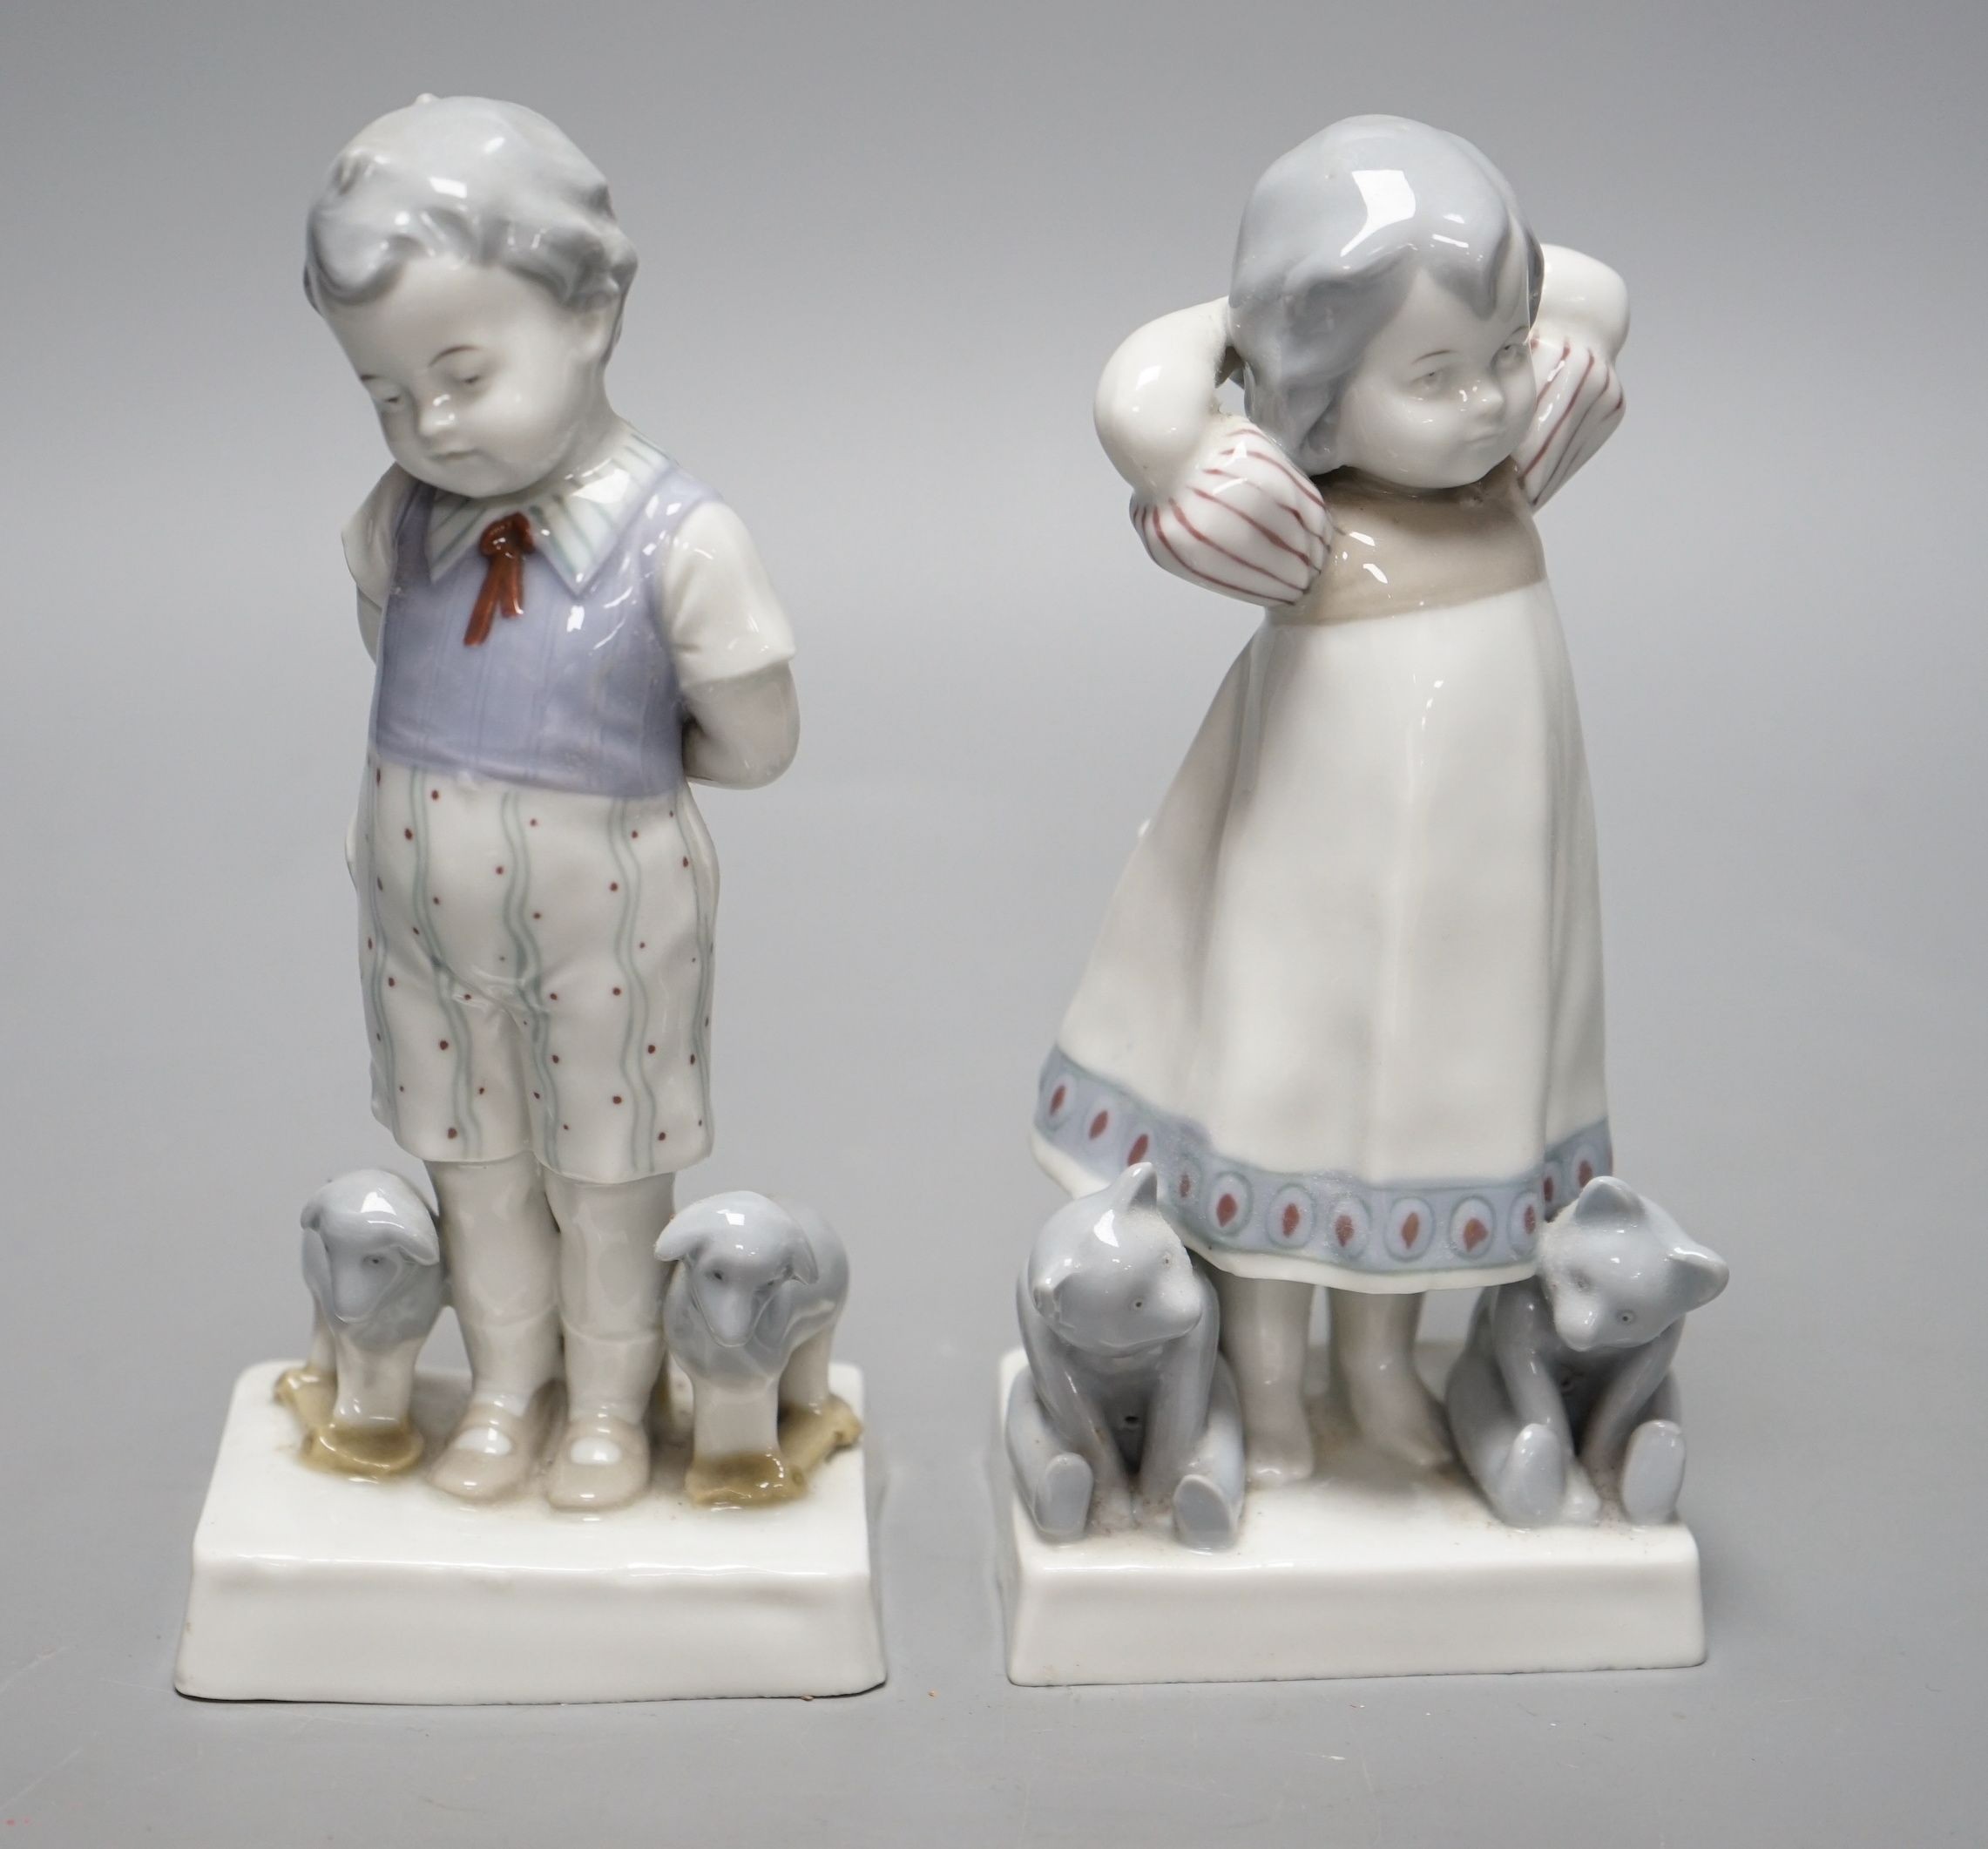 Teddy bear & Steiff collector’s interest - a pair of 1920s German Goebel porcelain figures of a girl and two teddy bears and a boy with two pull-along sheep on wheels, 17cms high